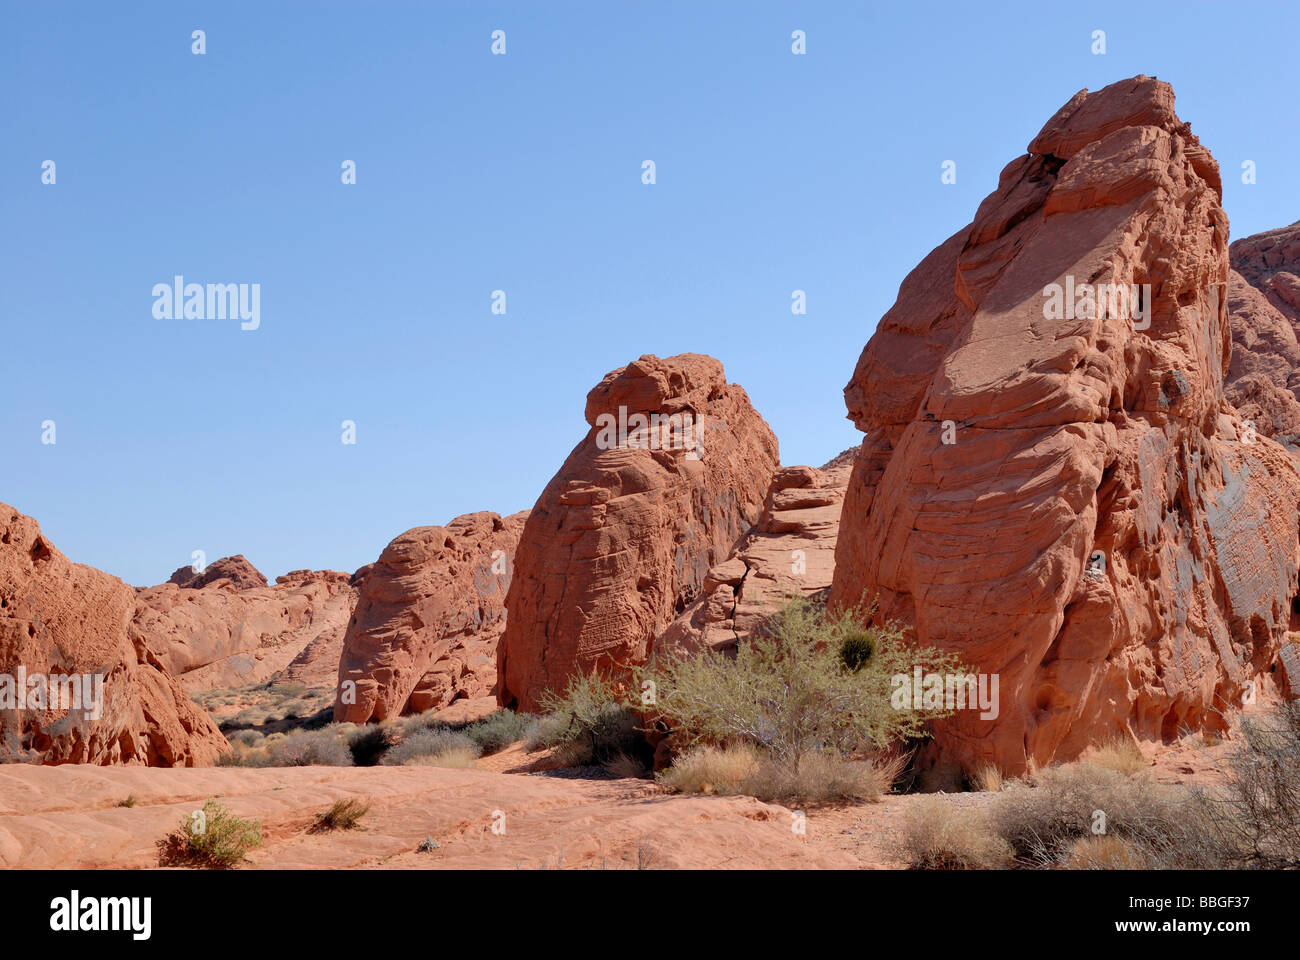 Sandstone formations, red, rip-like, Valley of Fire State Park, northeastern of Las Vegas, Nevada, USA Stock Photo